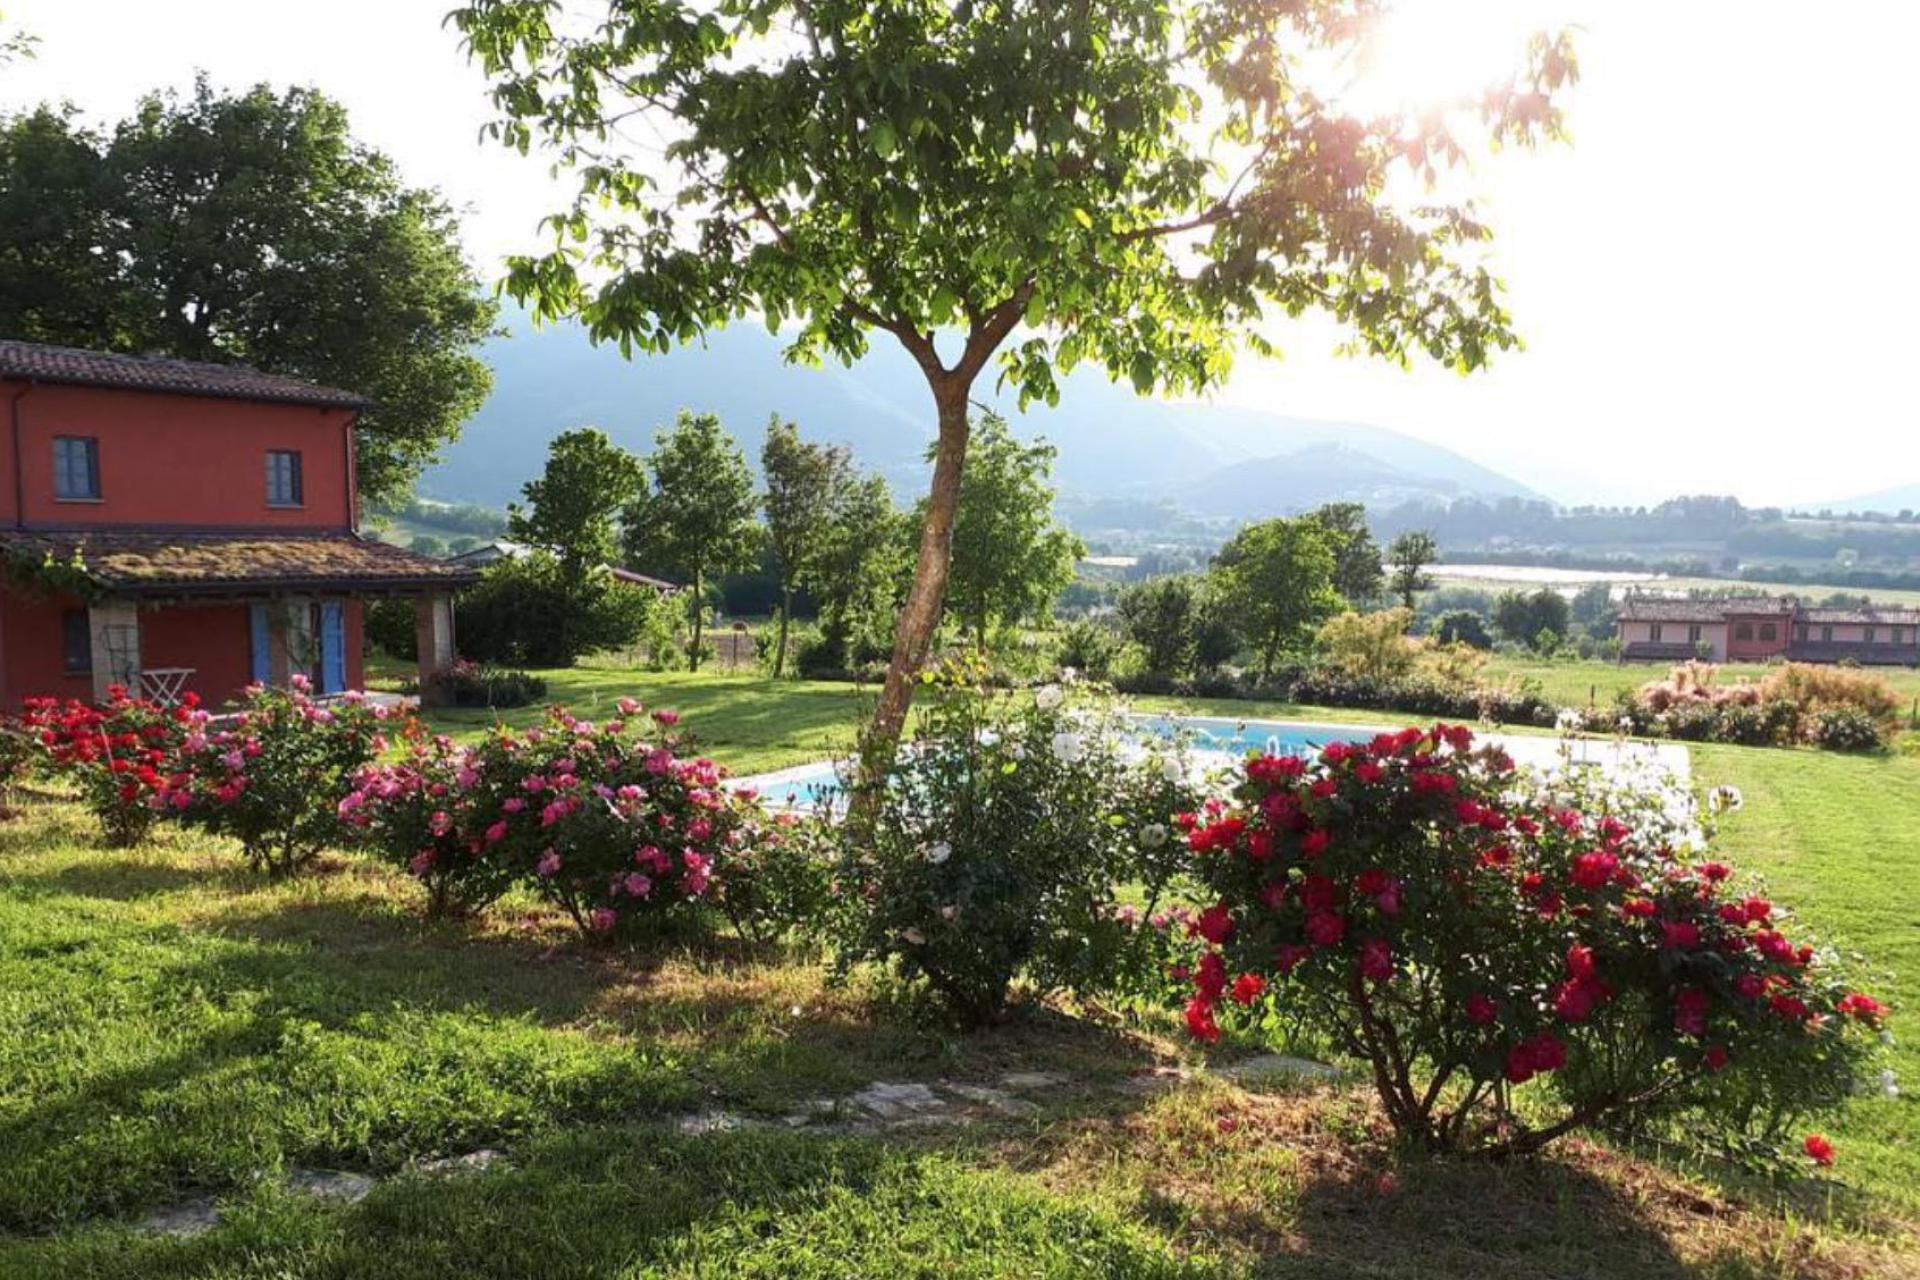 Agriturismo Marche Agriturismo Marche, cozy atmosphere and kid friendly